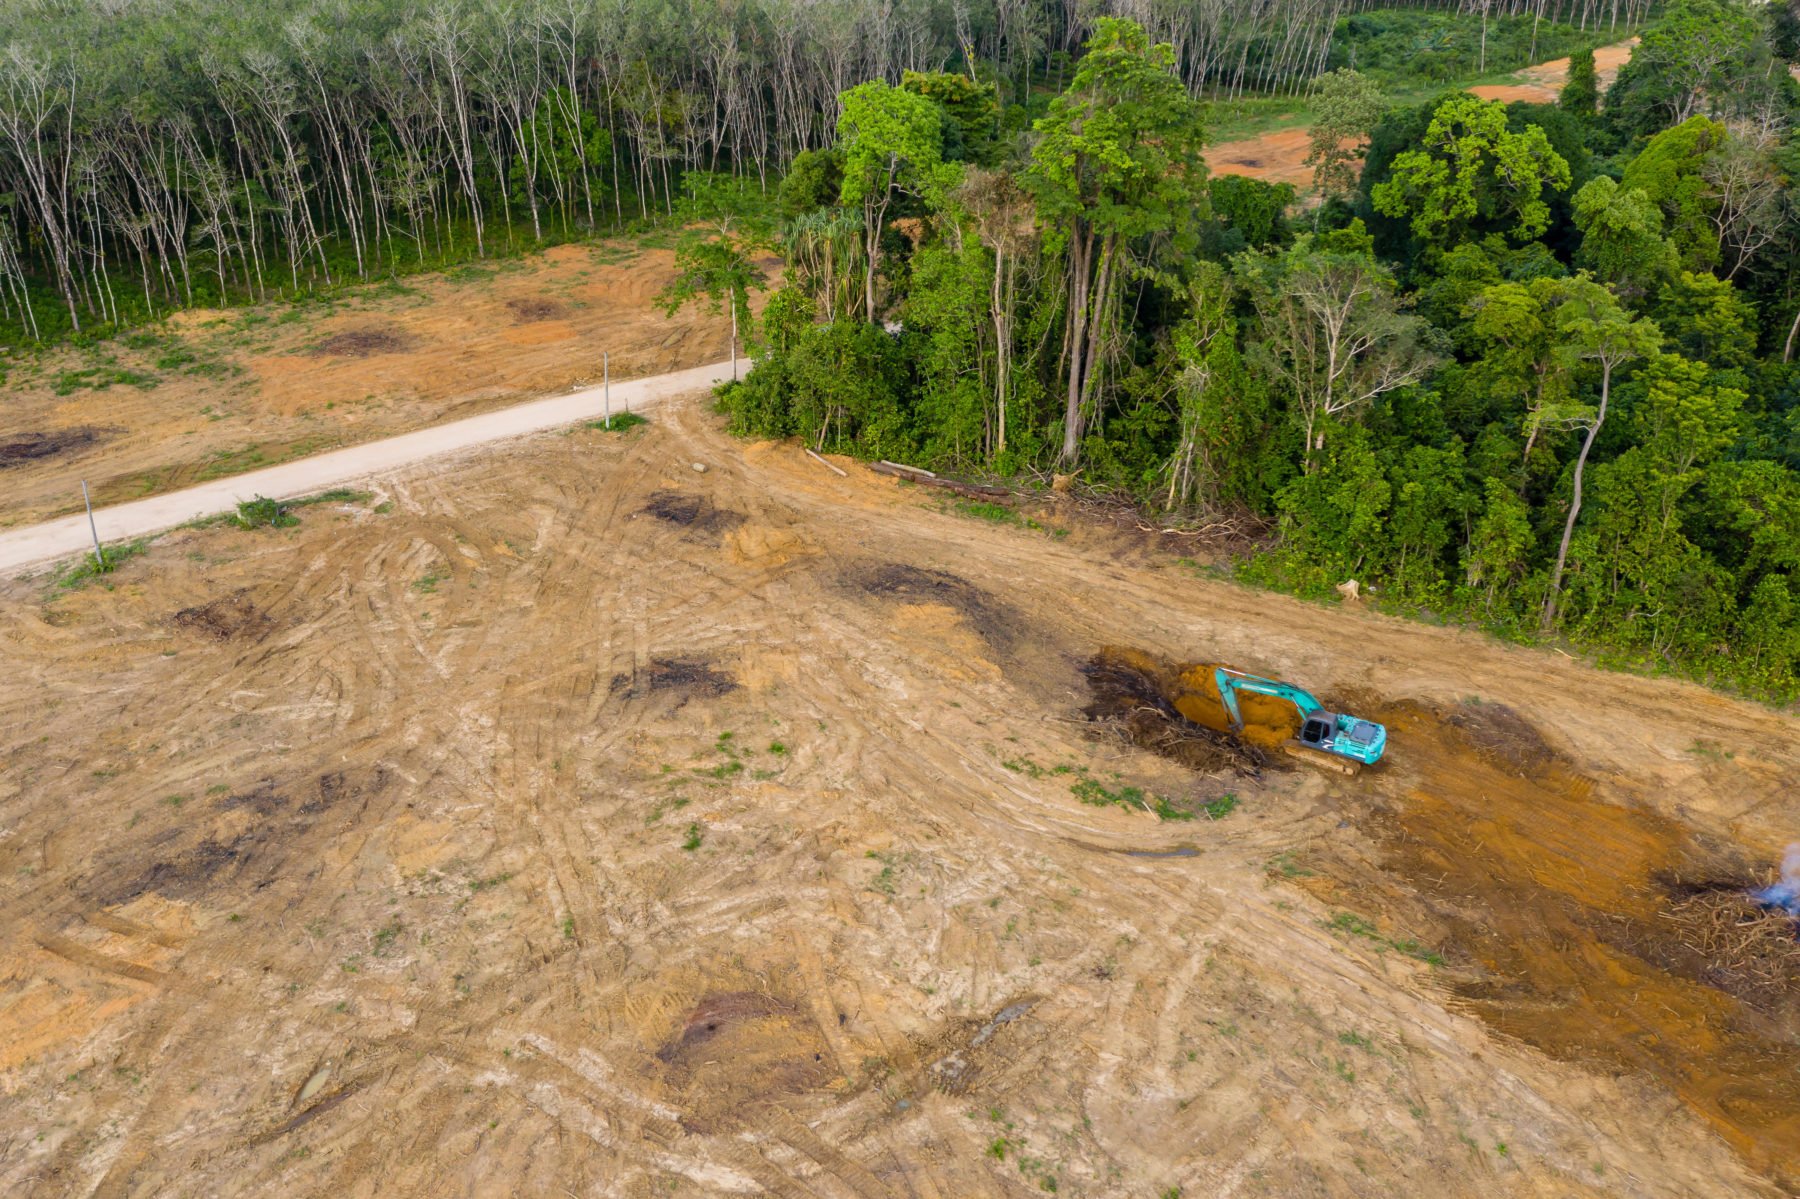 Aerial view of deforestation.  Rainforest being removed to make way for palm oil and rubber plantations [image: Alamy]